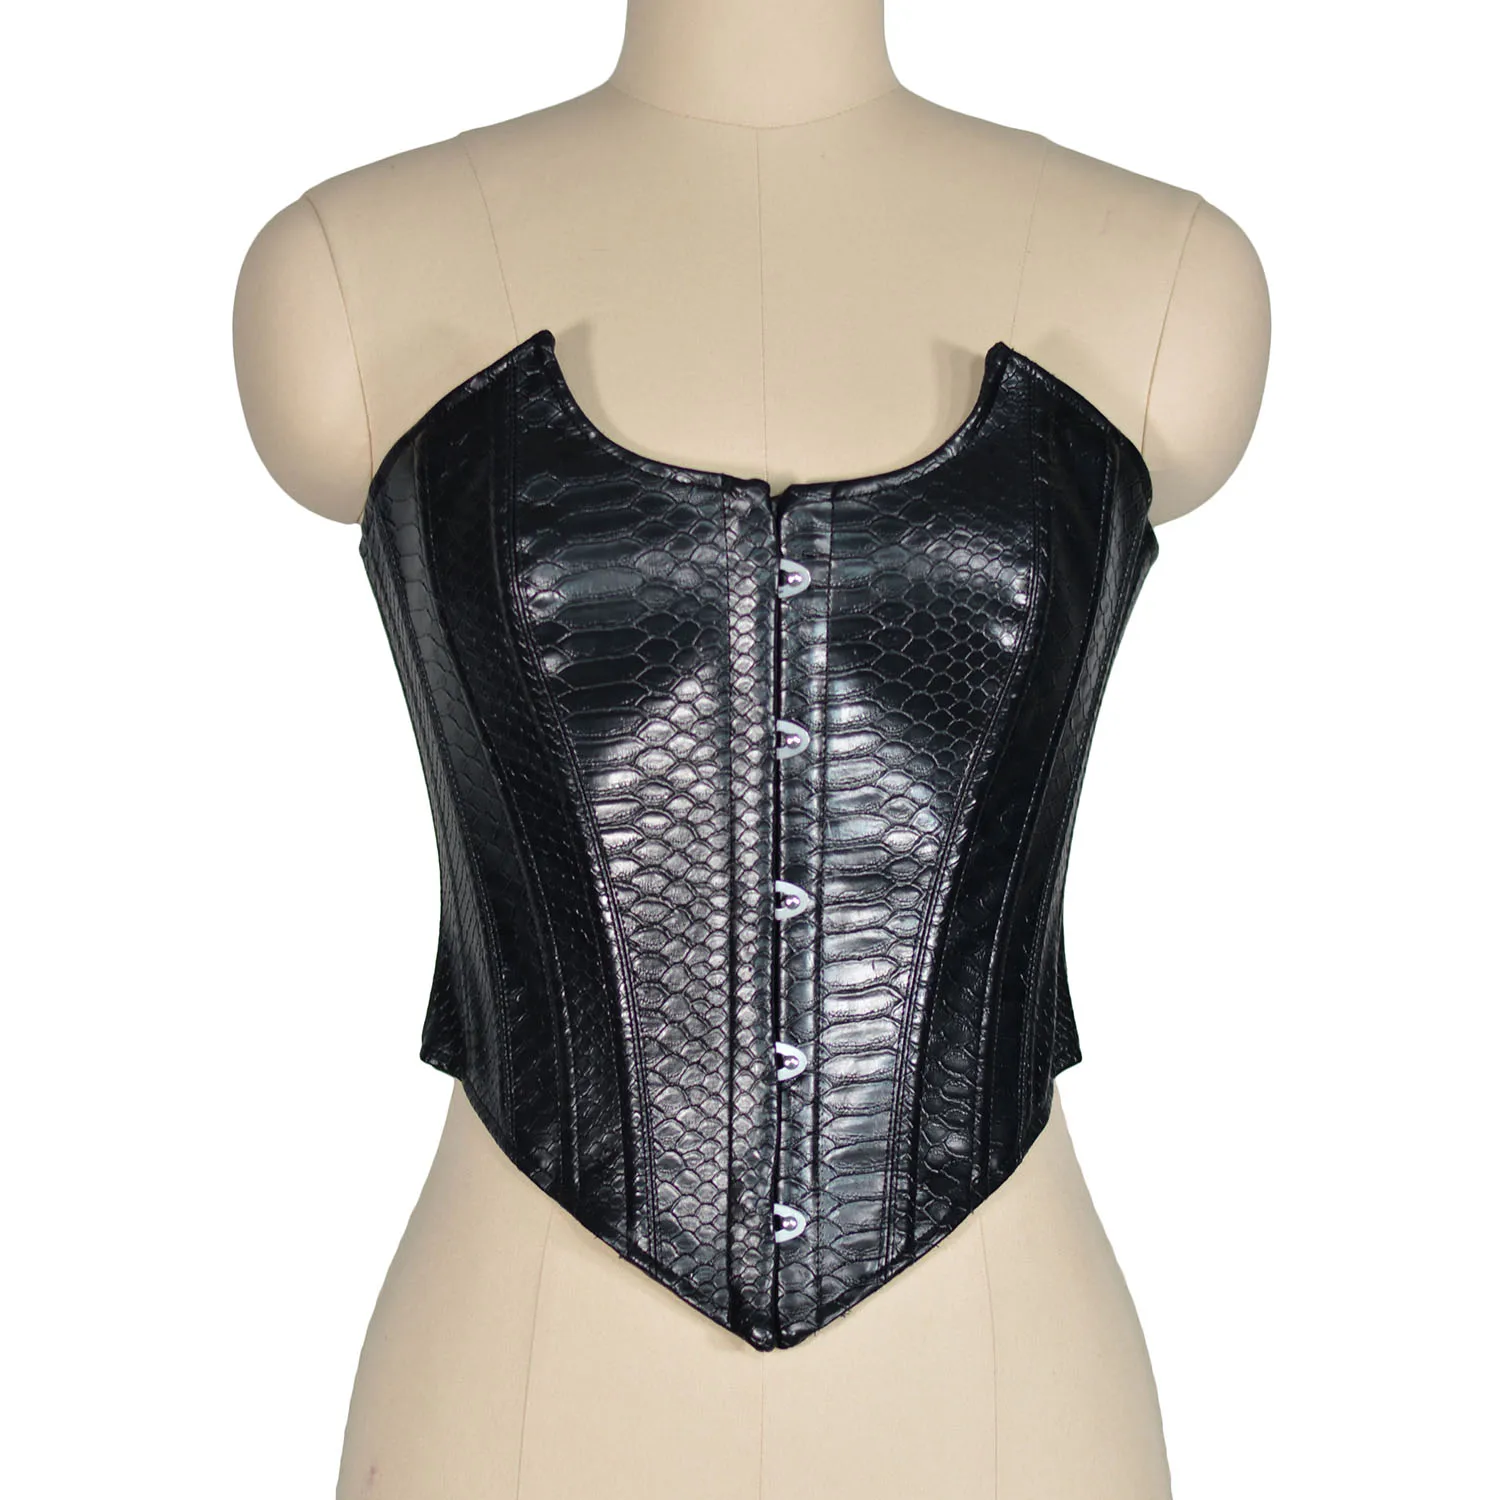 

Women Leather Corset Top Crop Bustier Gothic Bra Push Up Bodice Sexy Lingerie Corselet